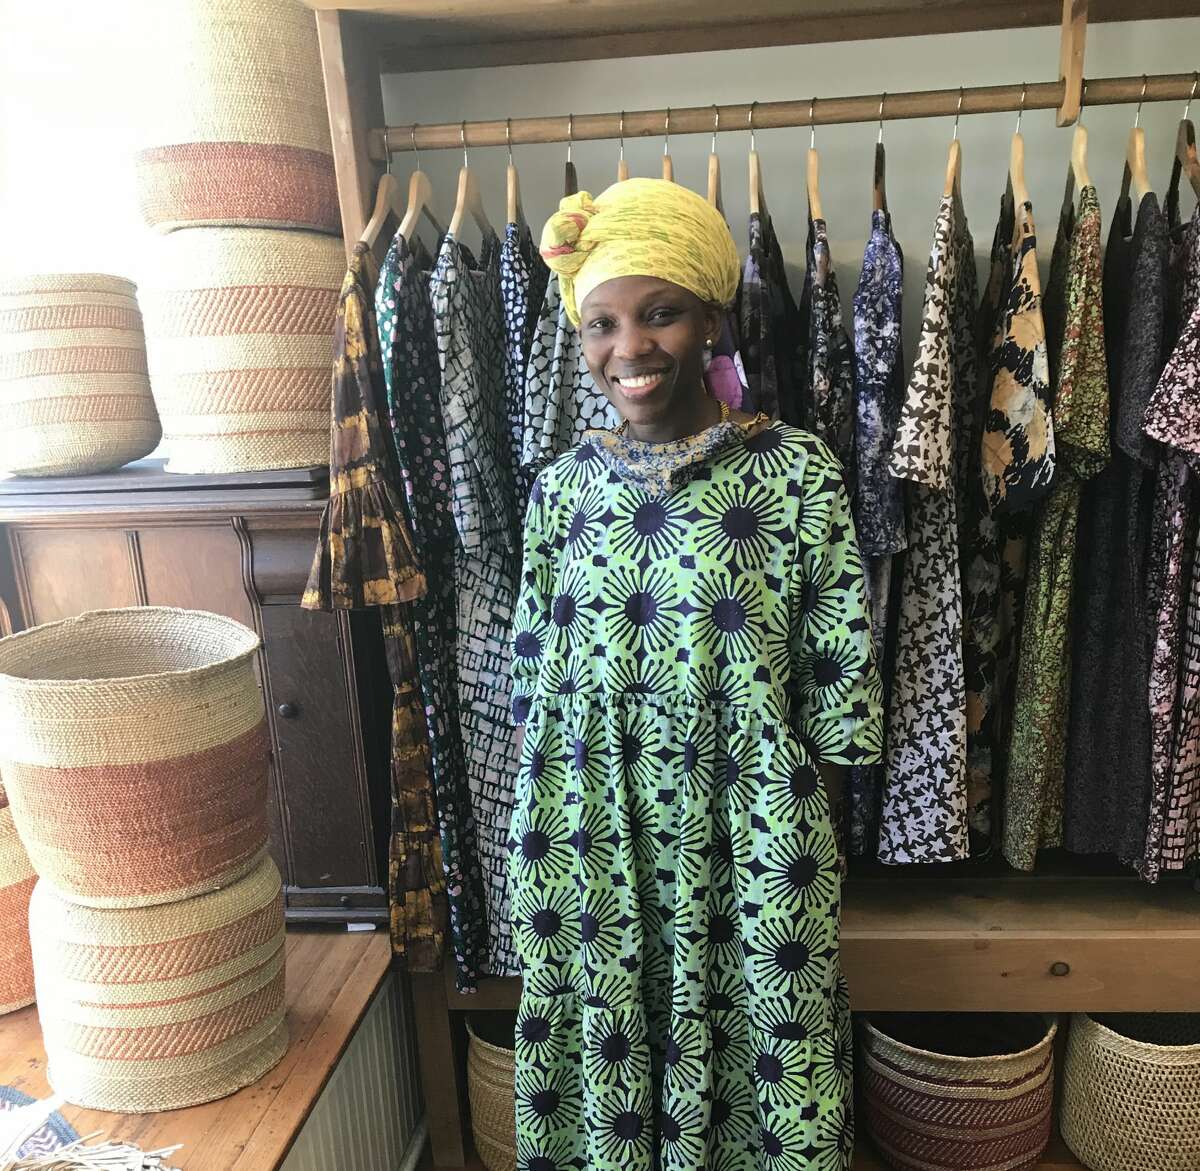 Fahari Wambura, owner of Fahari Bazaar in Chatham, didn't see a sustained uptick in sales, and that didn't surprise her. “You cannot change hundreds of years of history or a mindset within a year,” she said.